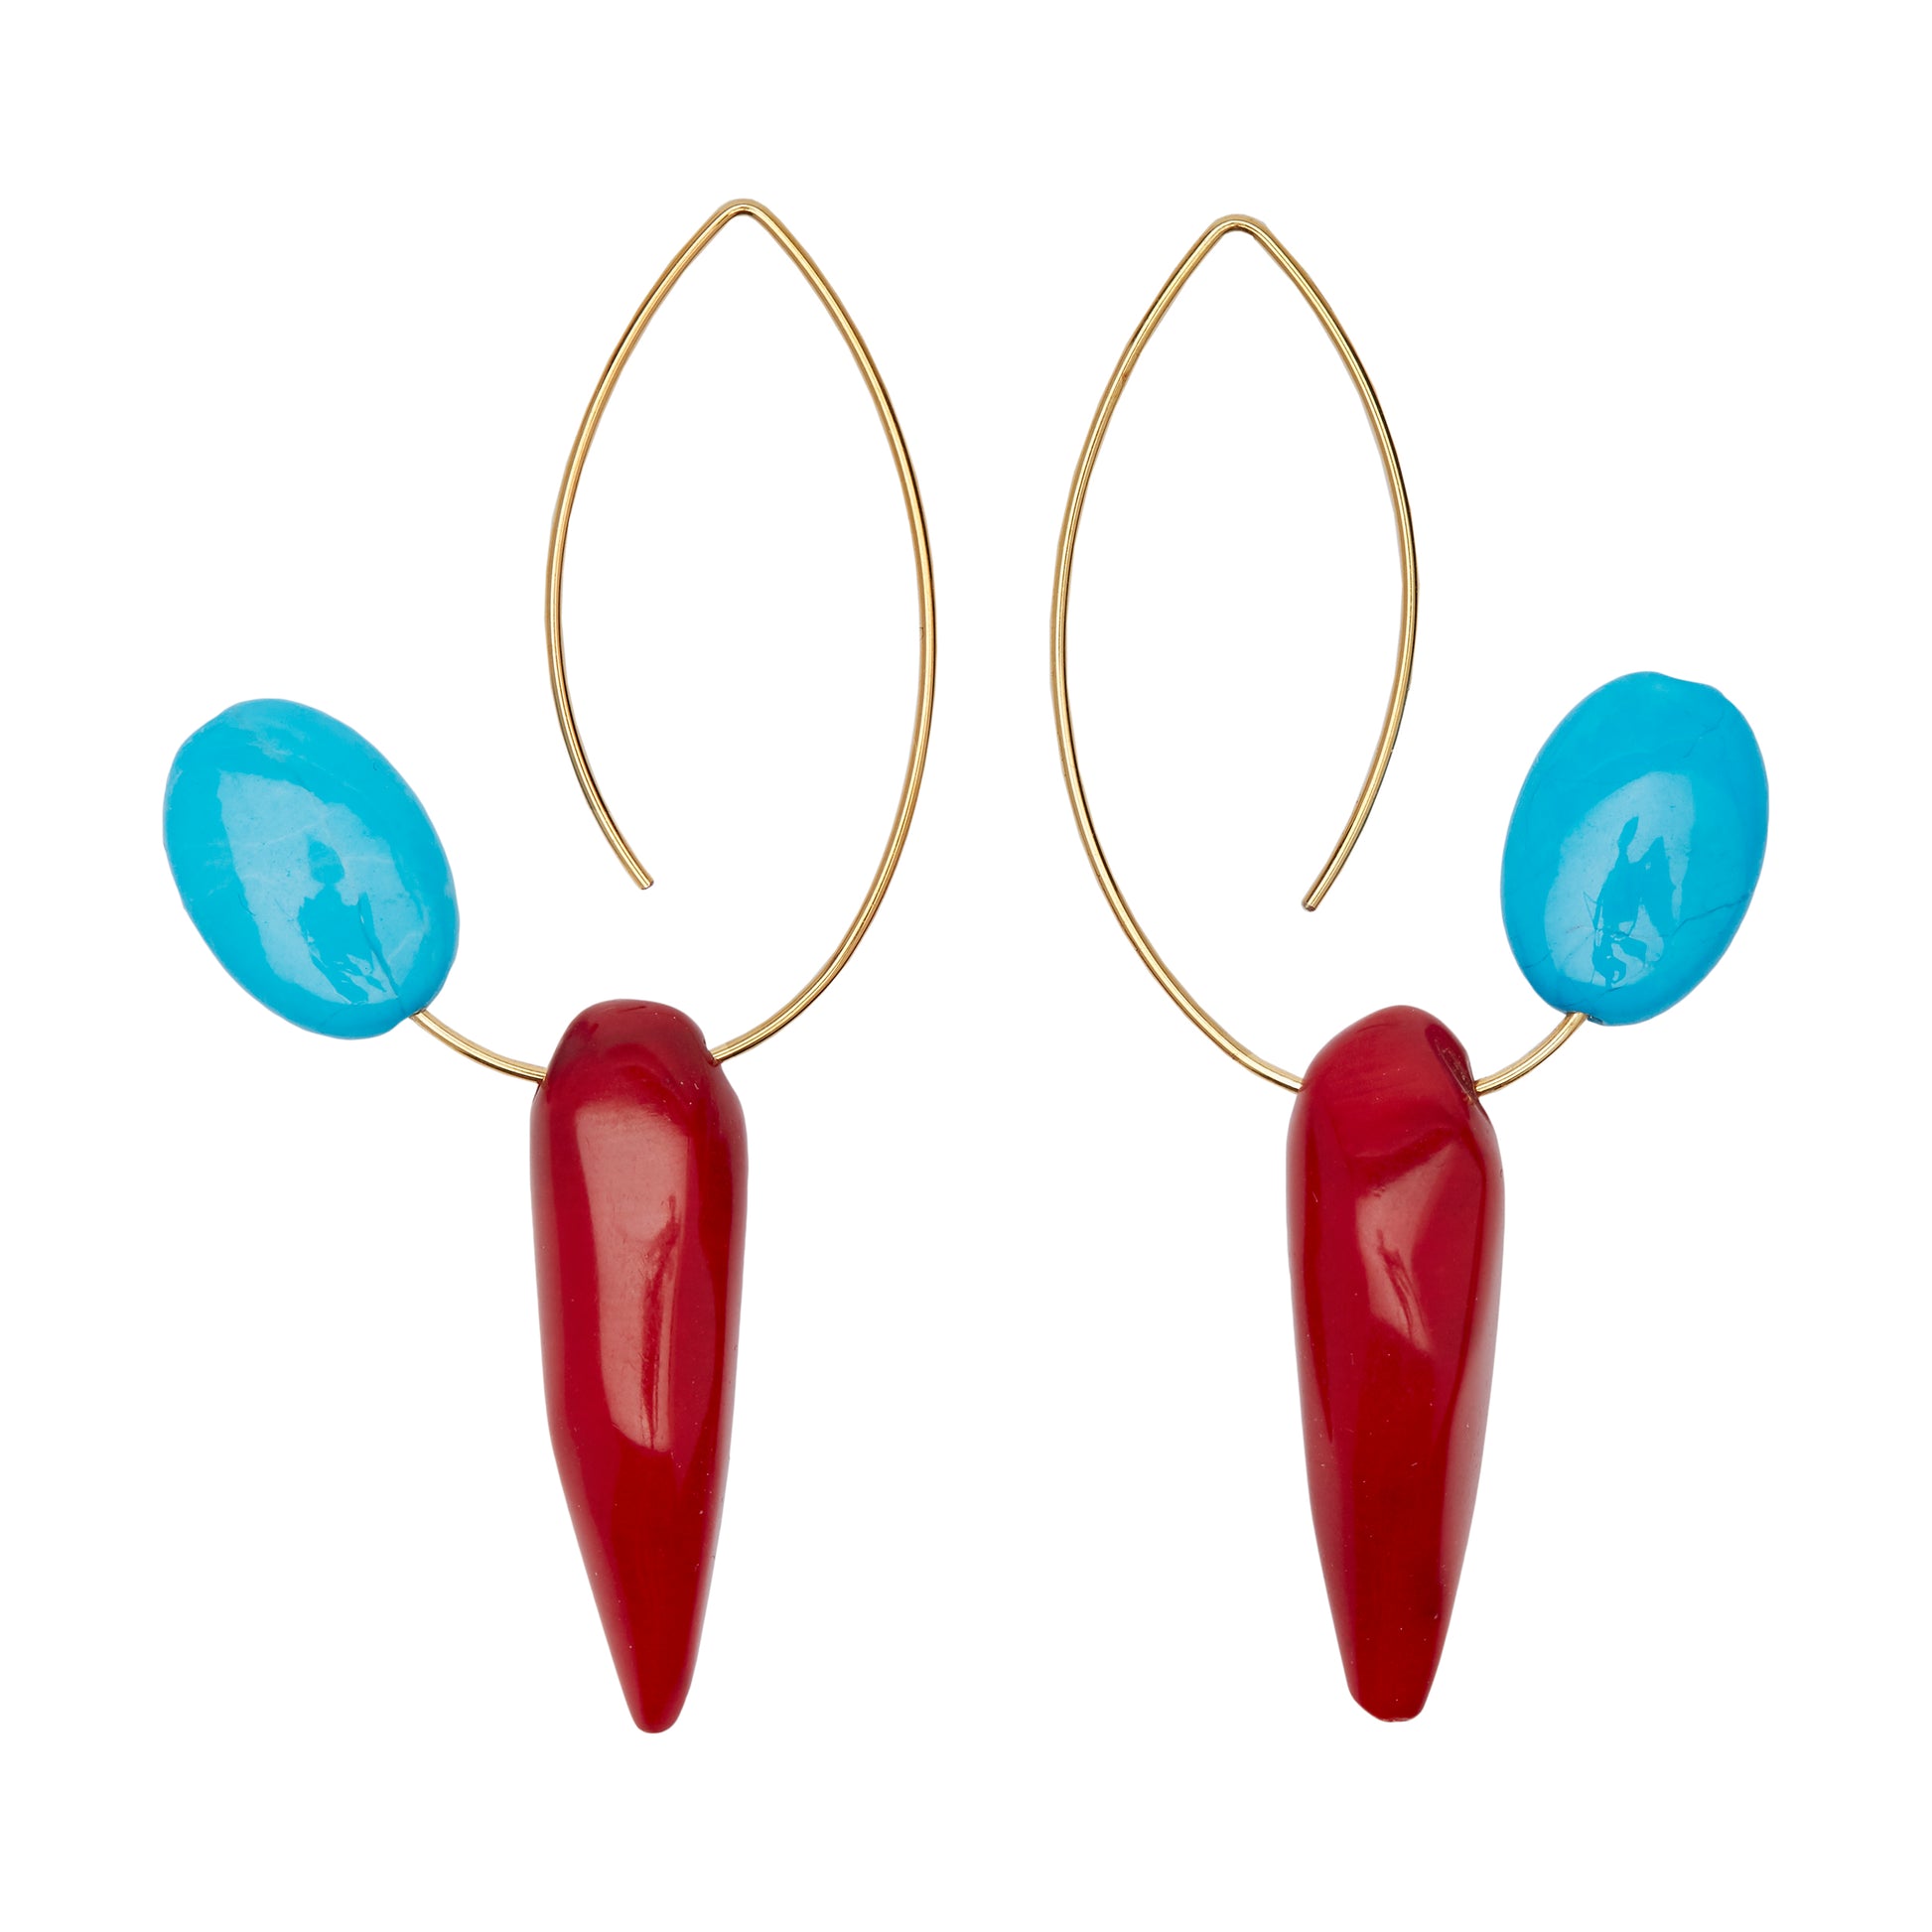 Angled Curve Earrings with Turquoise and Coral